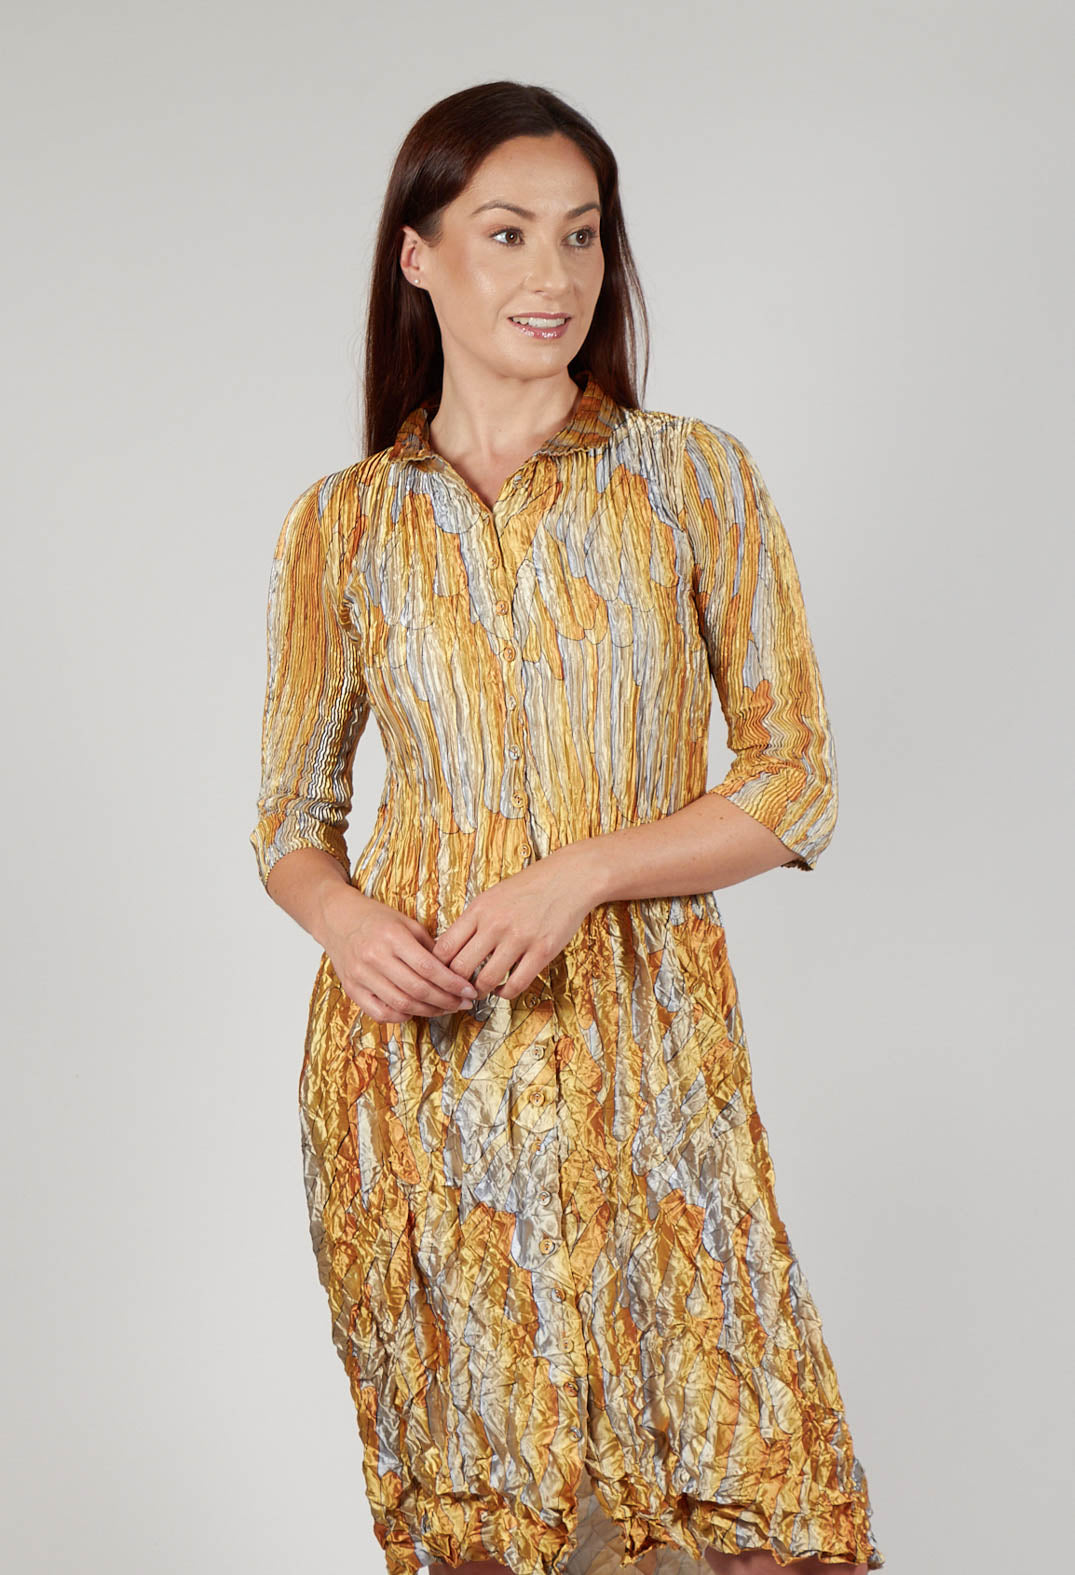 Nehry Metallic Dress in Golden Feather